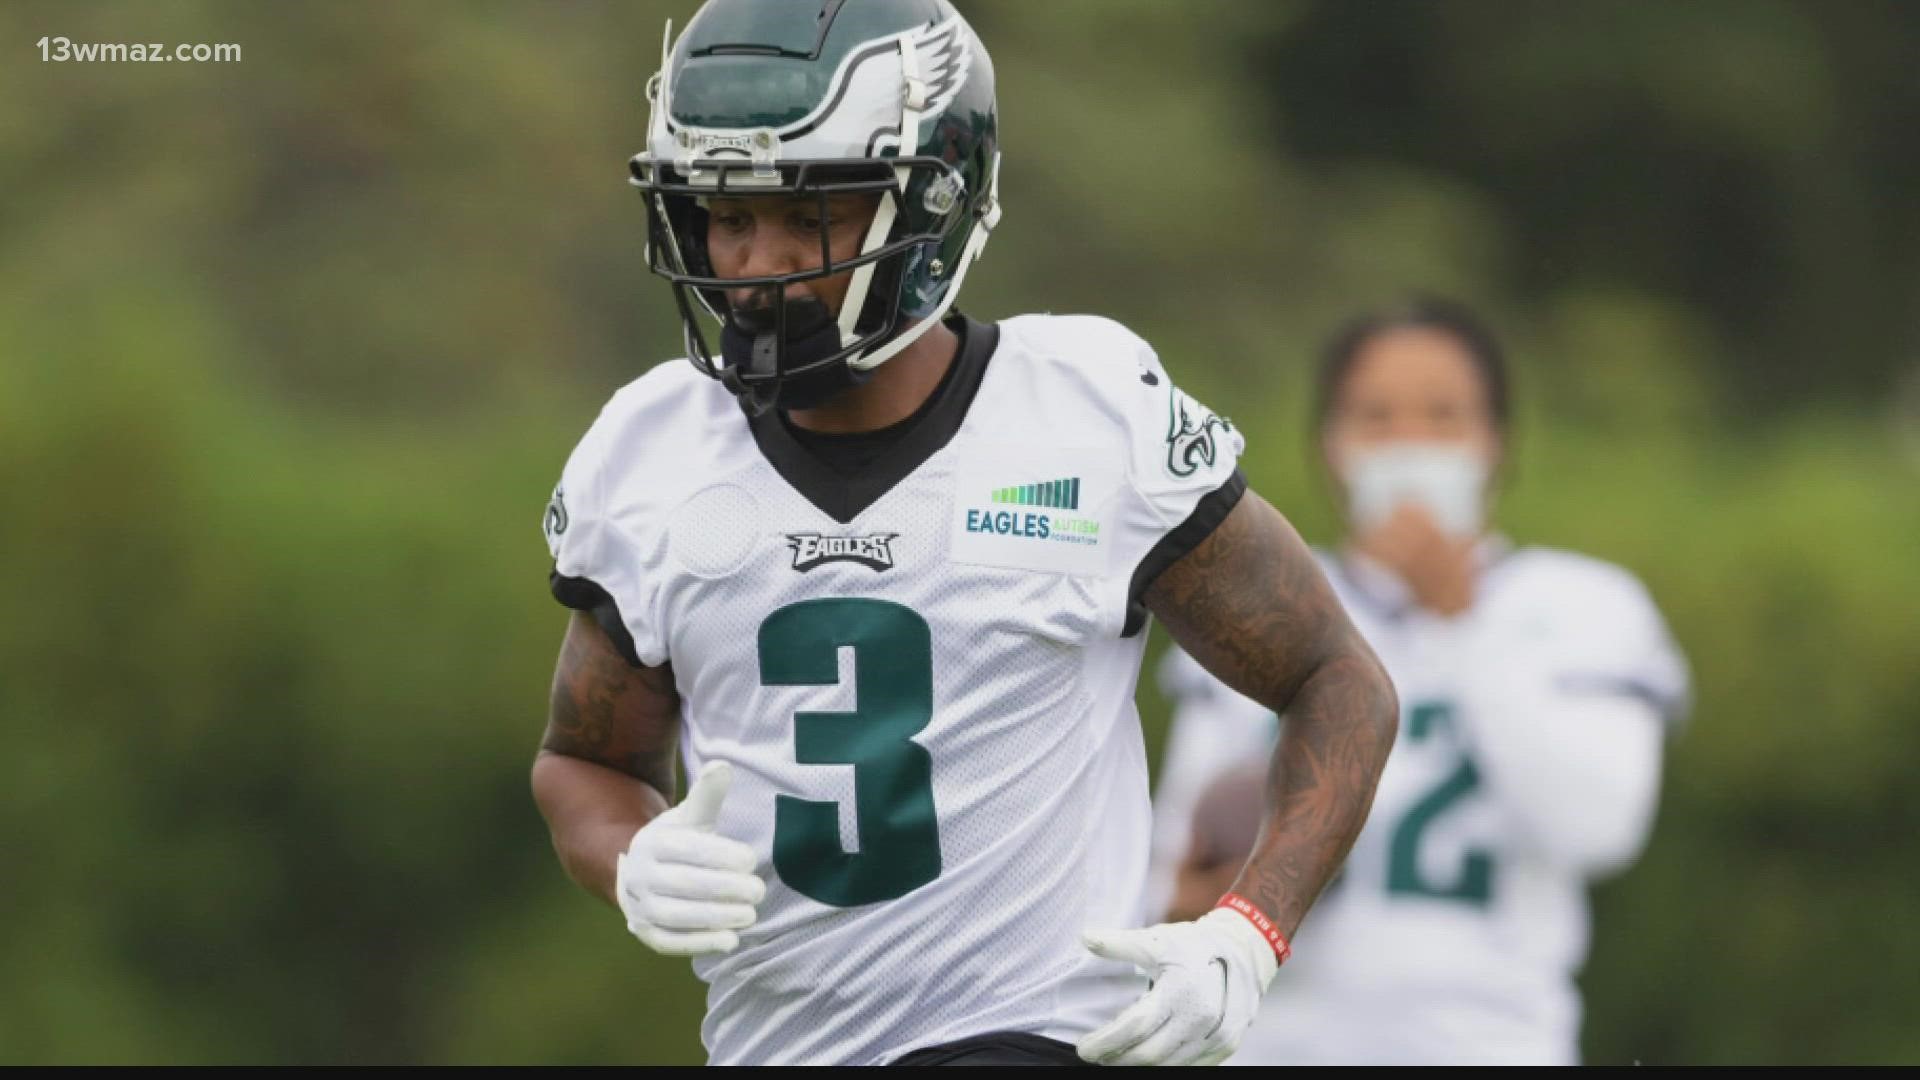 Warner Robins native and current Philadelphia Eagles cornerback Steven Nelson helped the program keep pushing forward by purchasing helmets and shoulder pads